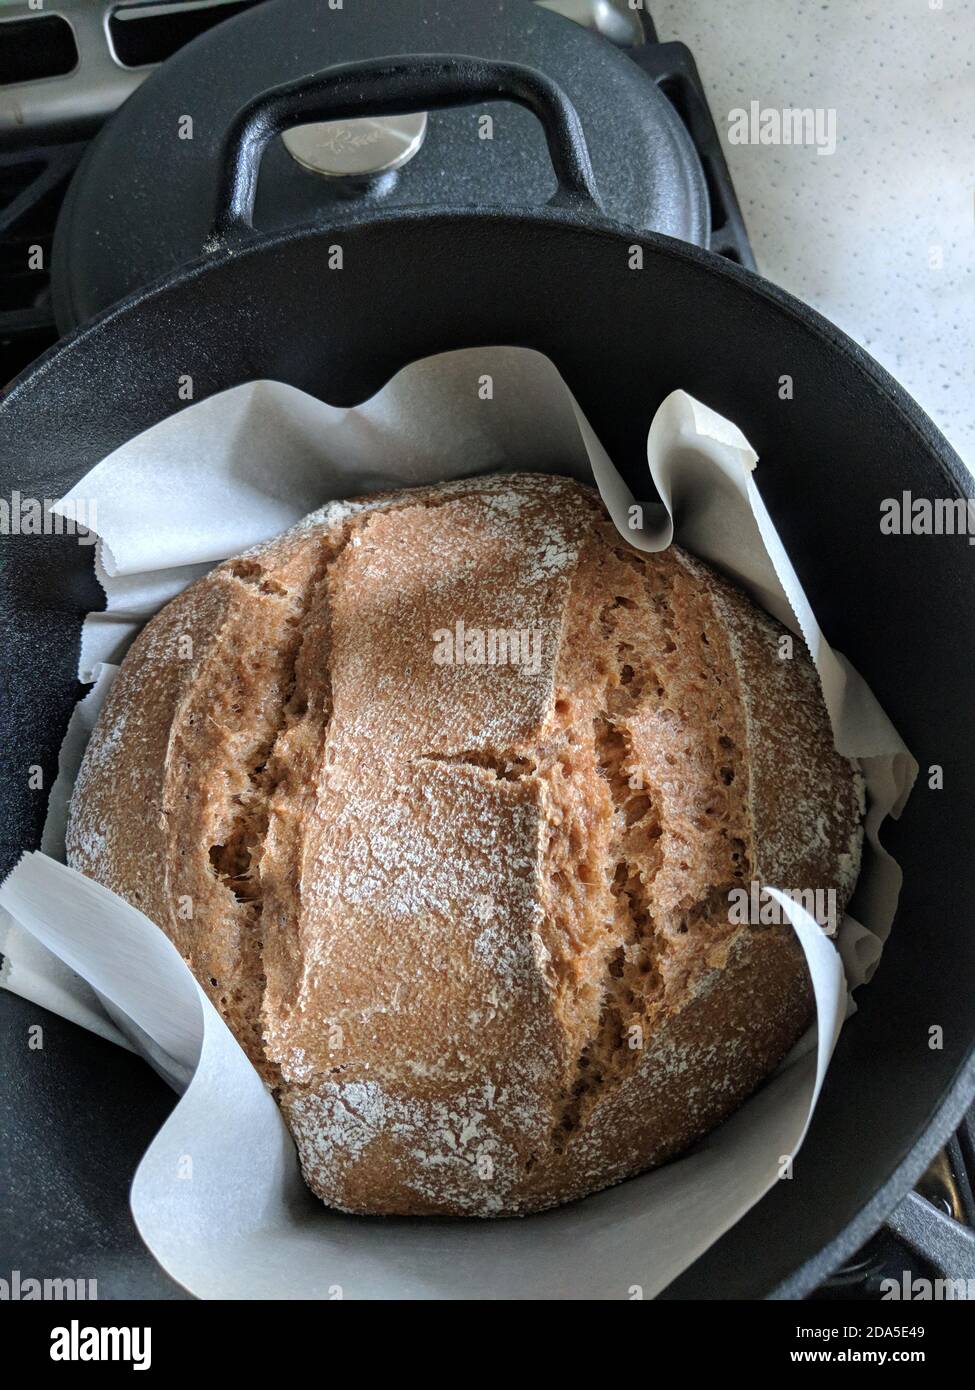 Freshly made loaf of round bread in the black cast iron oven pan